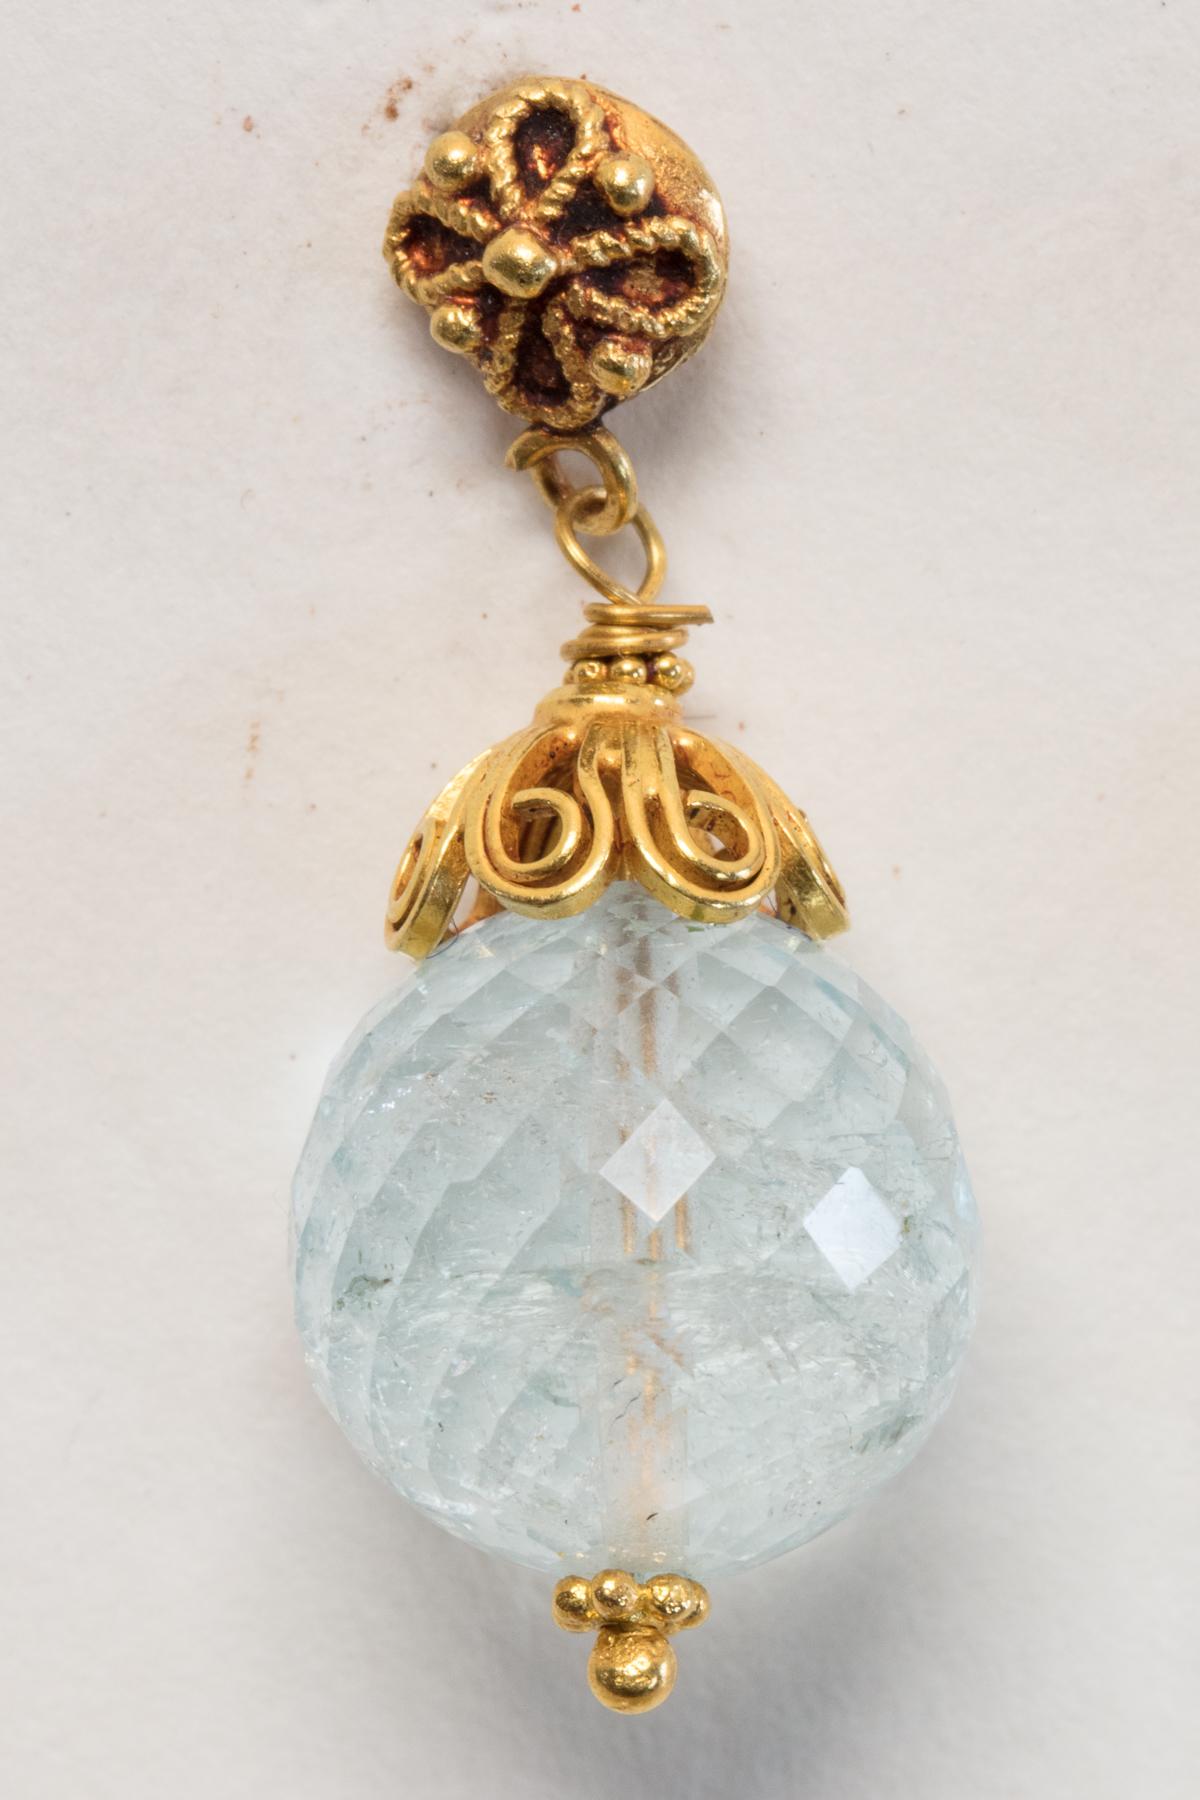 22K gold with fine wire work details and a large 13mm, faceted aquamarine drop.  Aquamarine has excellent color and clarity.  18K gold post for pierced ears.  By Deborah Lockhart Phillips.